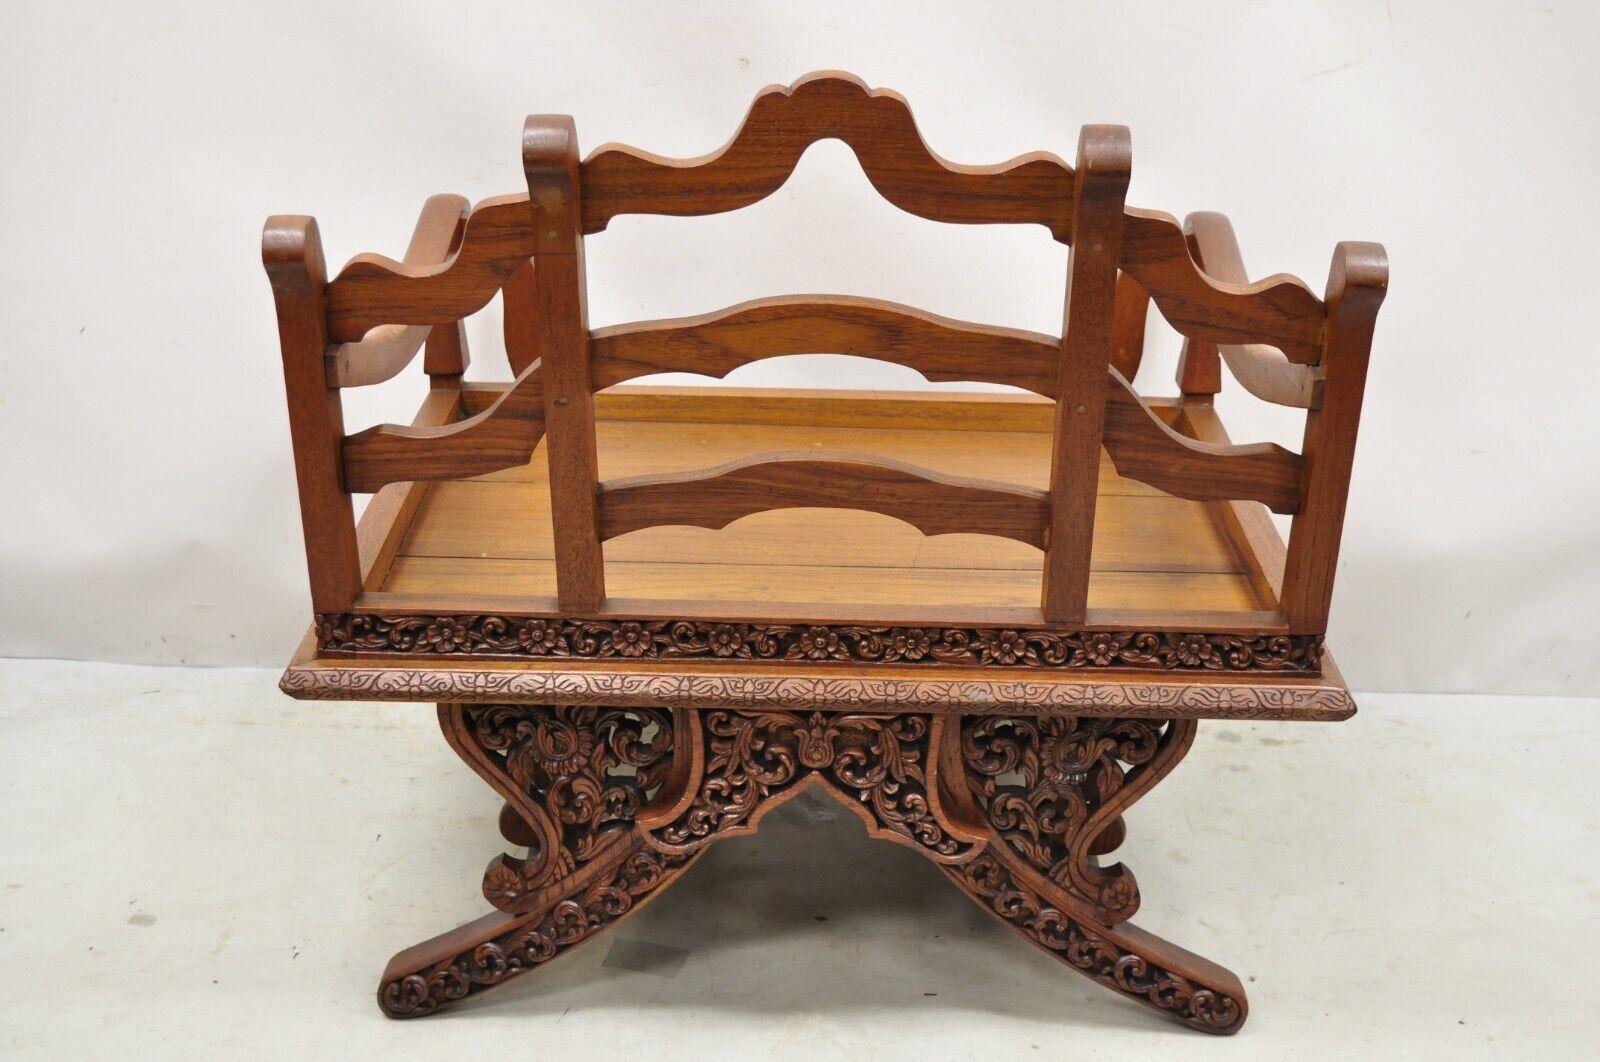 Vintage Chinoiserie Carved Teak Wood Howdah Elephant Saddle Accent Chair For Sale 5